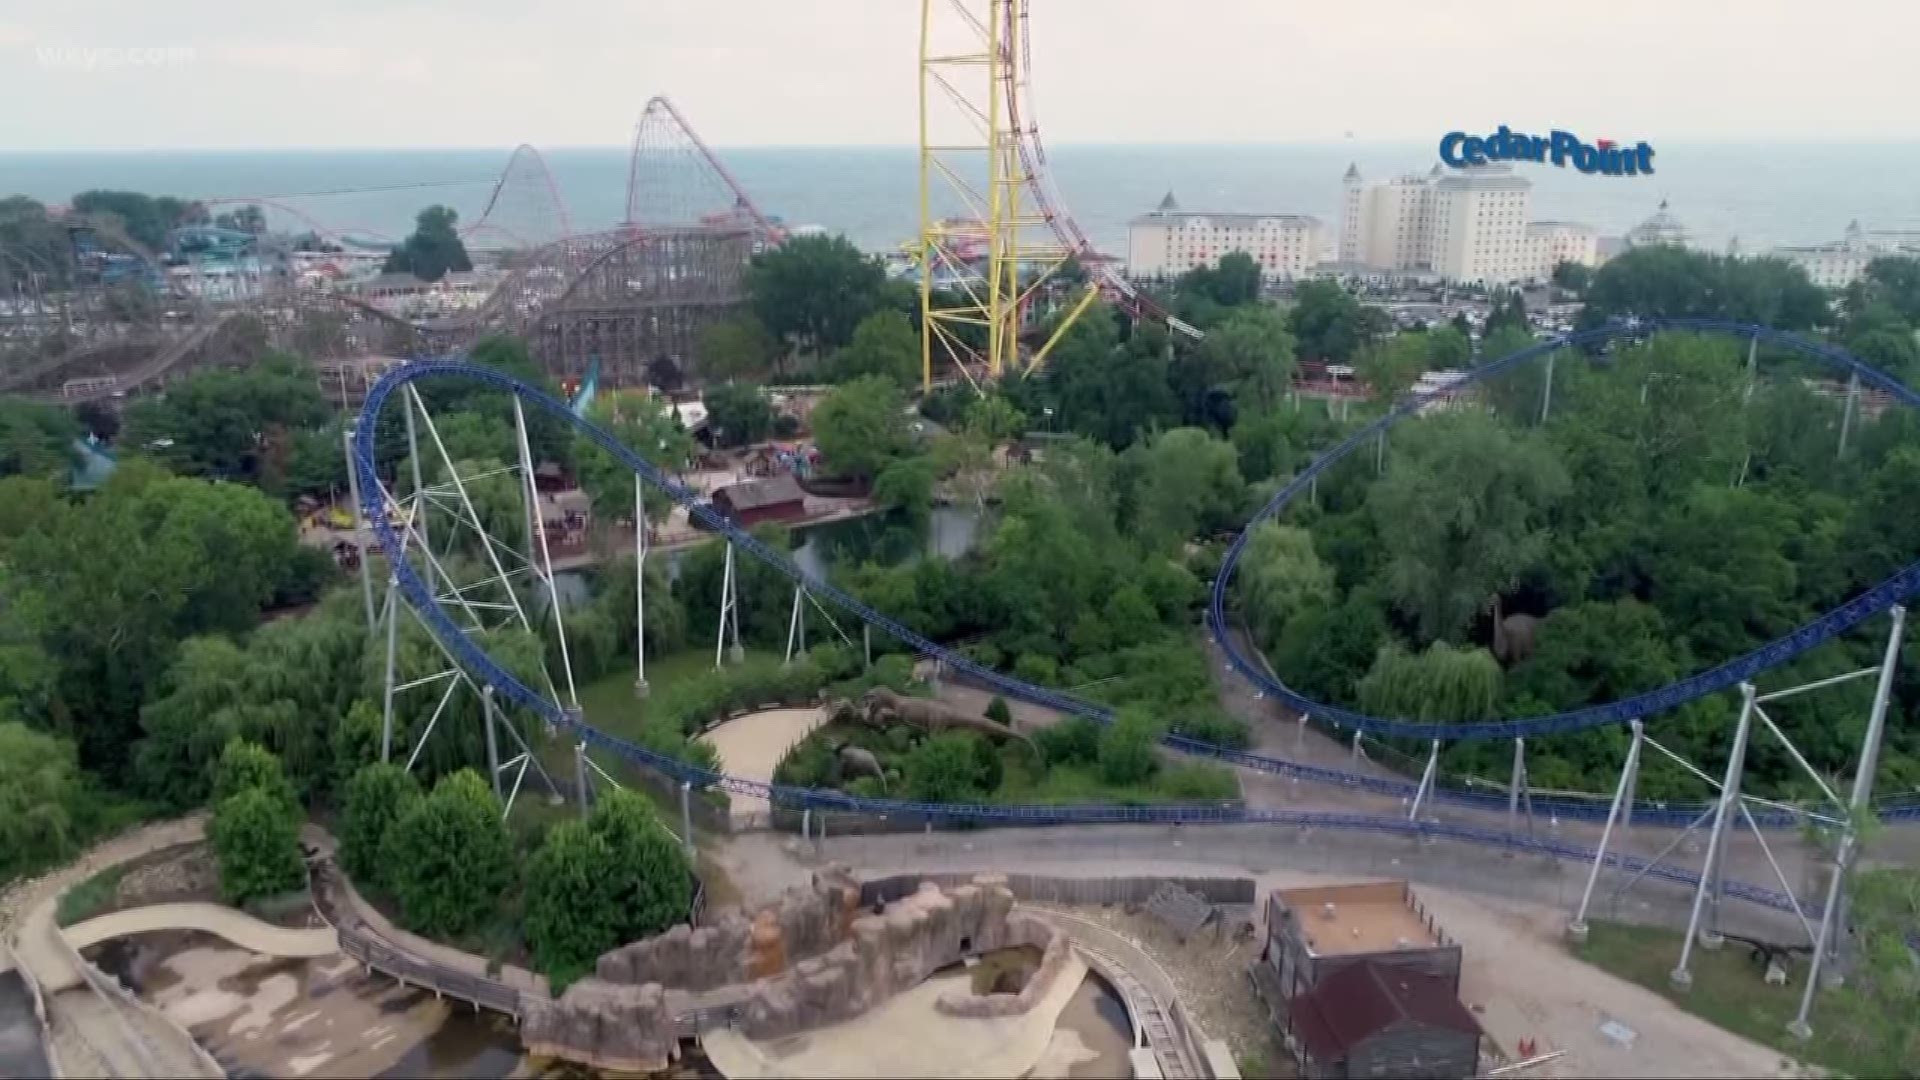 May 3, 2019: Cedar Point offers a very unique tour experience on certain mornings that takes you to the top of the Valravn roller coaster.